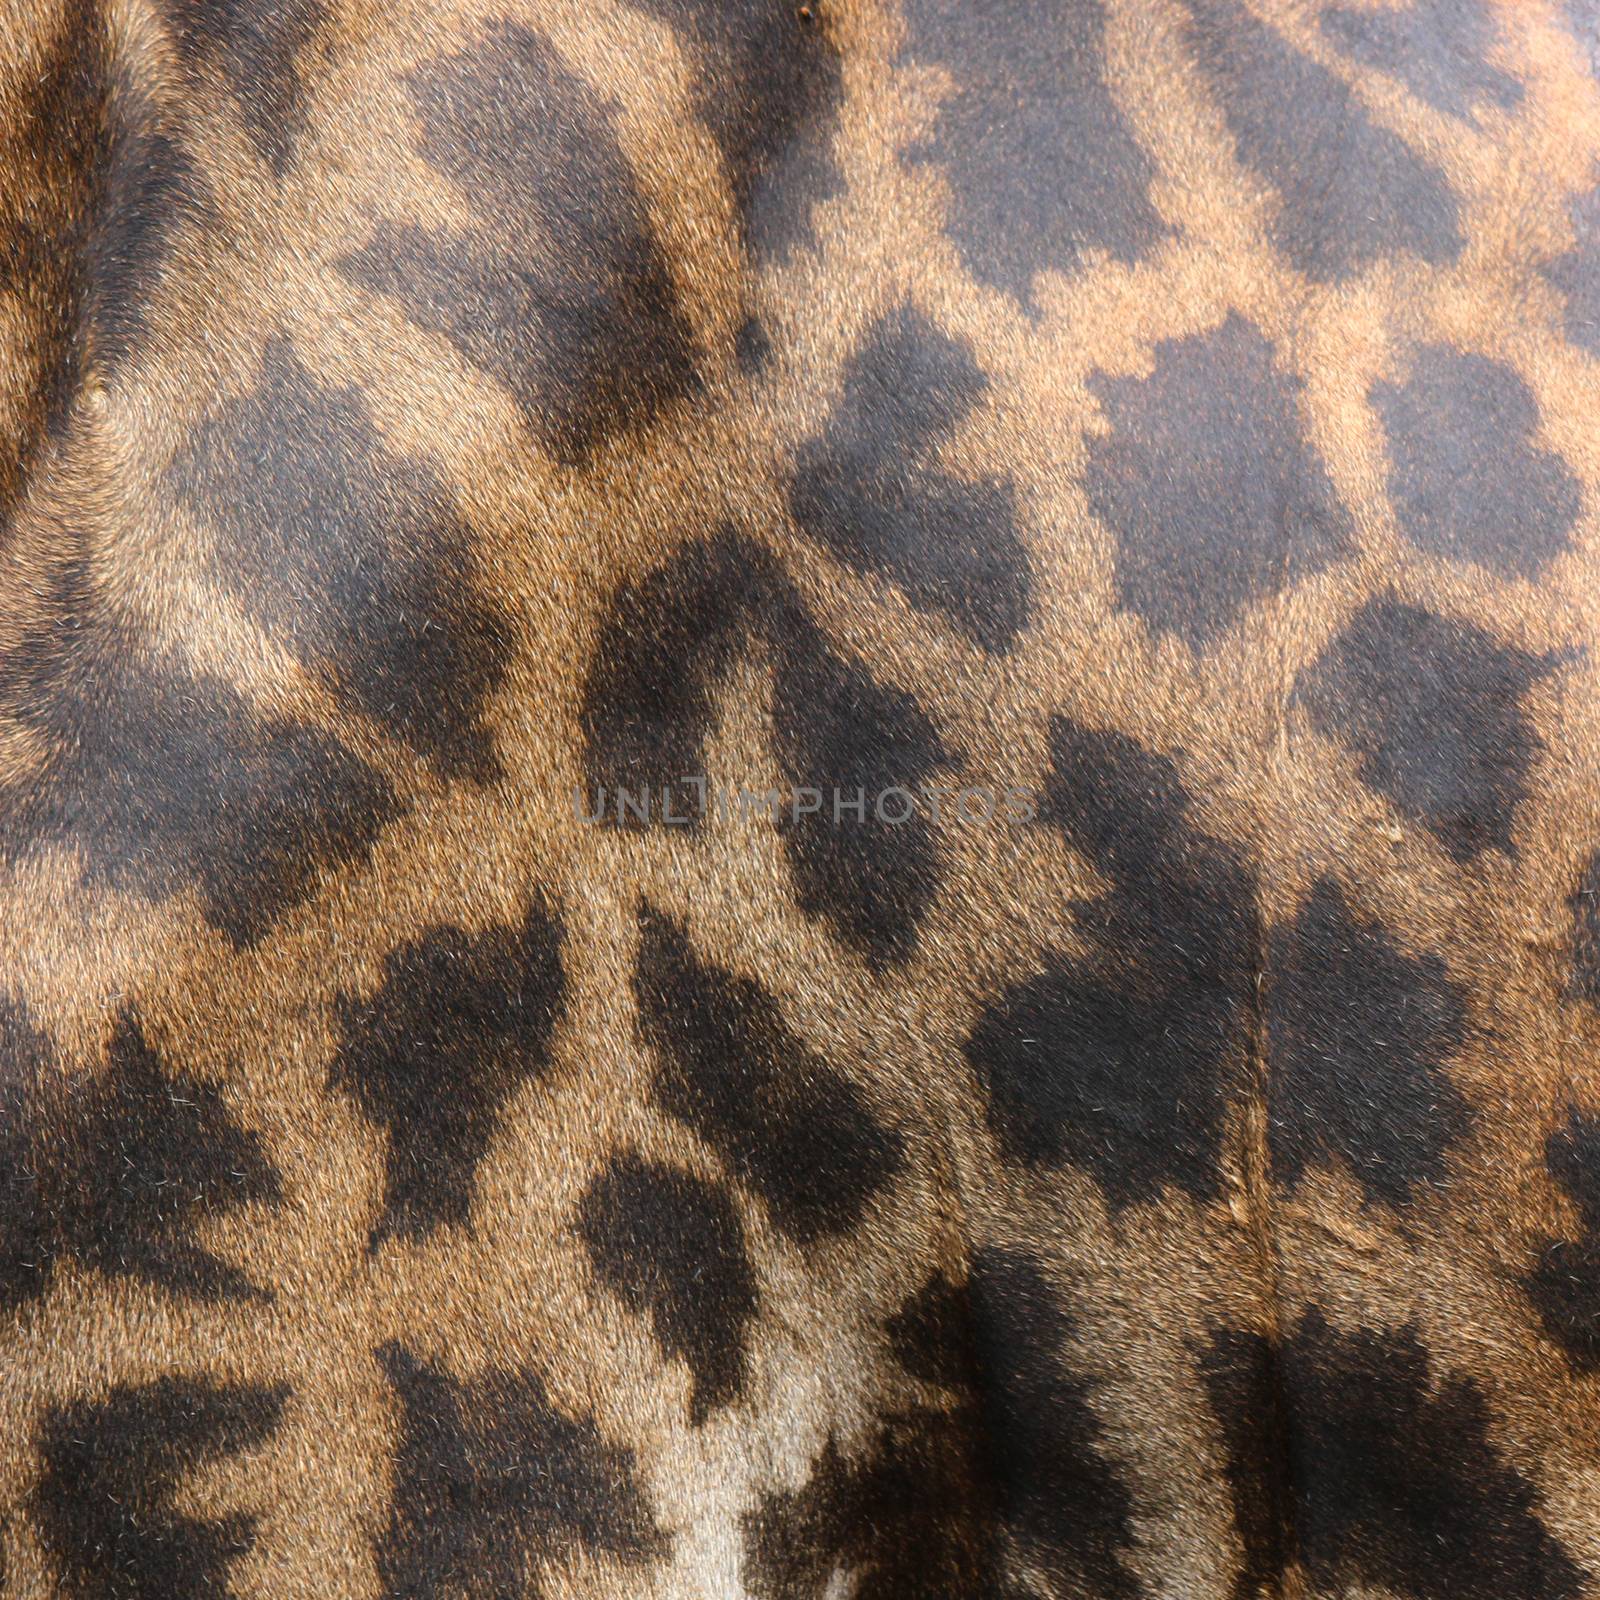 leather skin of giraffe as textured